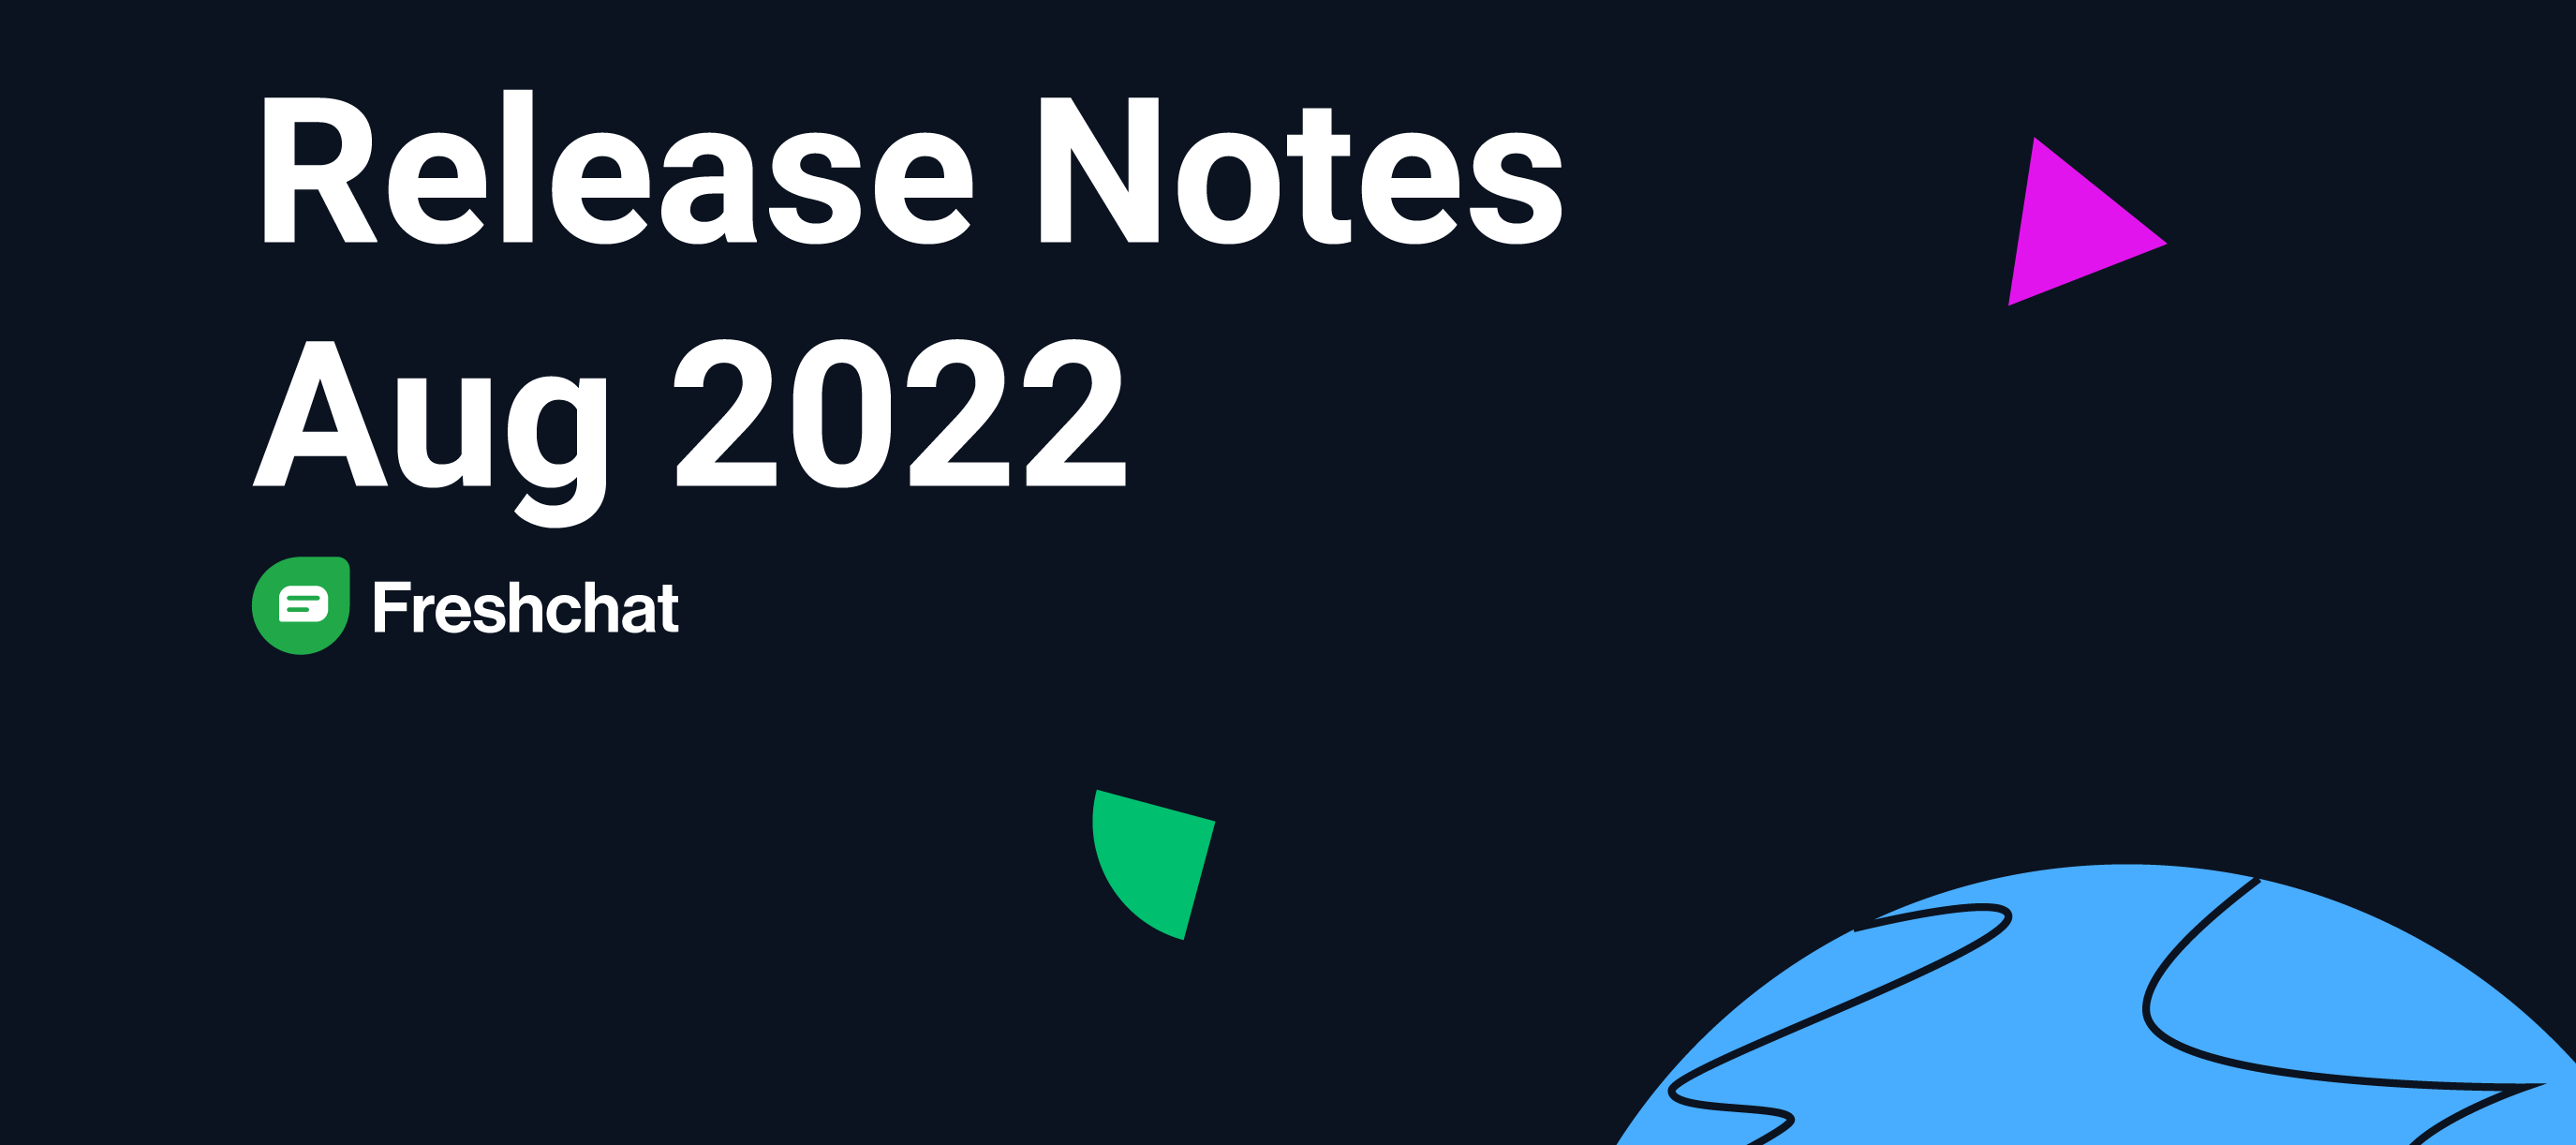 Freshchat Release Notes - Aug 2022